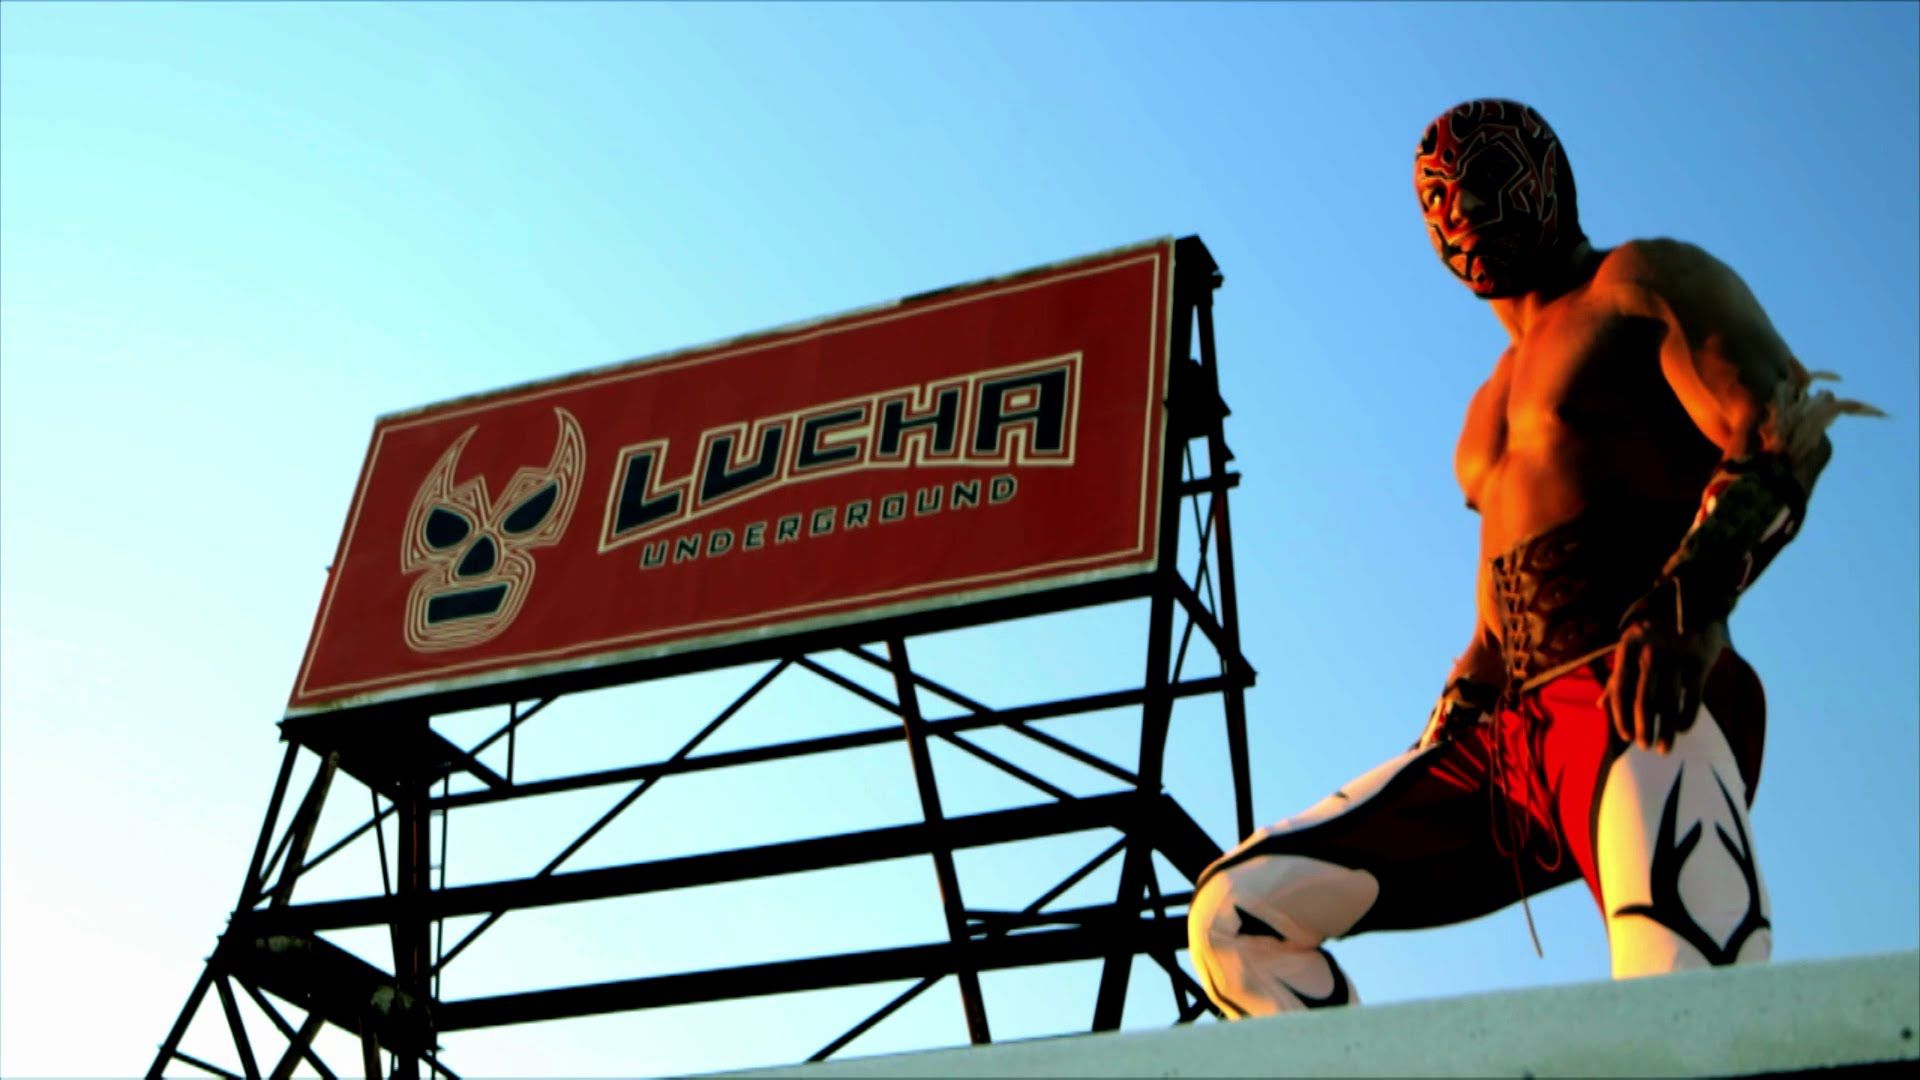 Outside Lucha Underground Temple HD Wallpaper